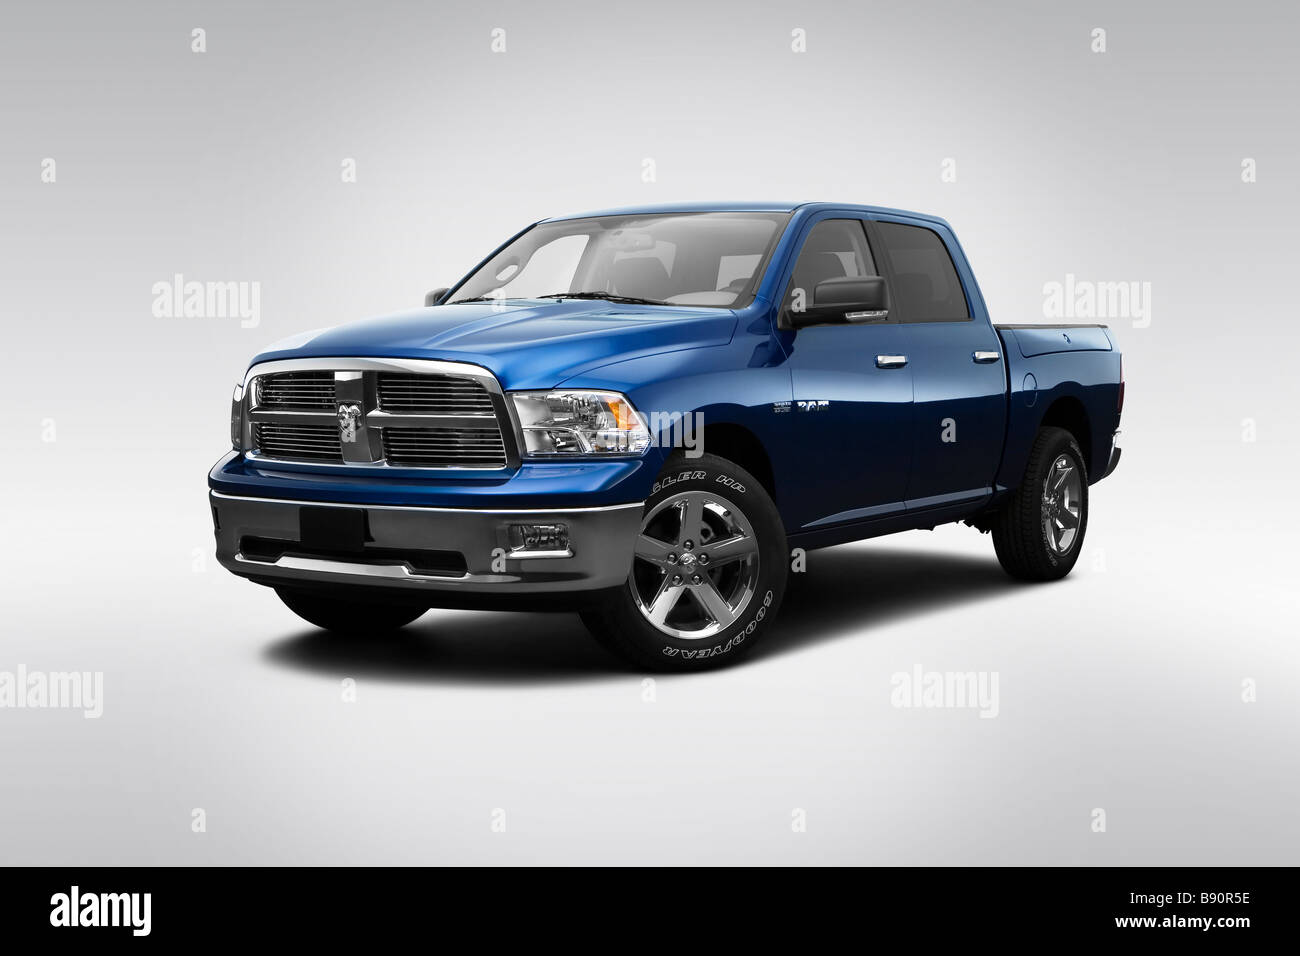 2009 Dodge Ram 1500 SLT in Blue - Front angle view Stock Photo